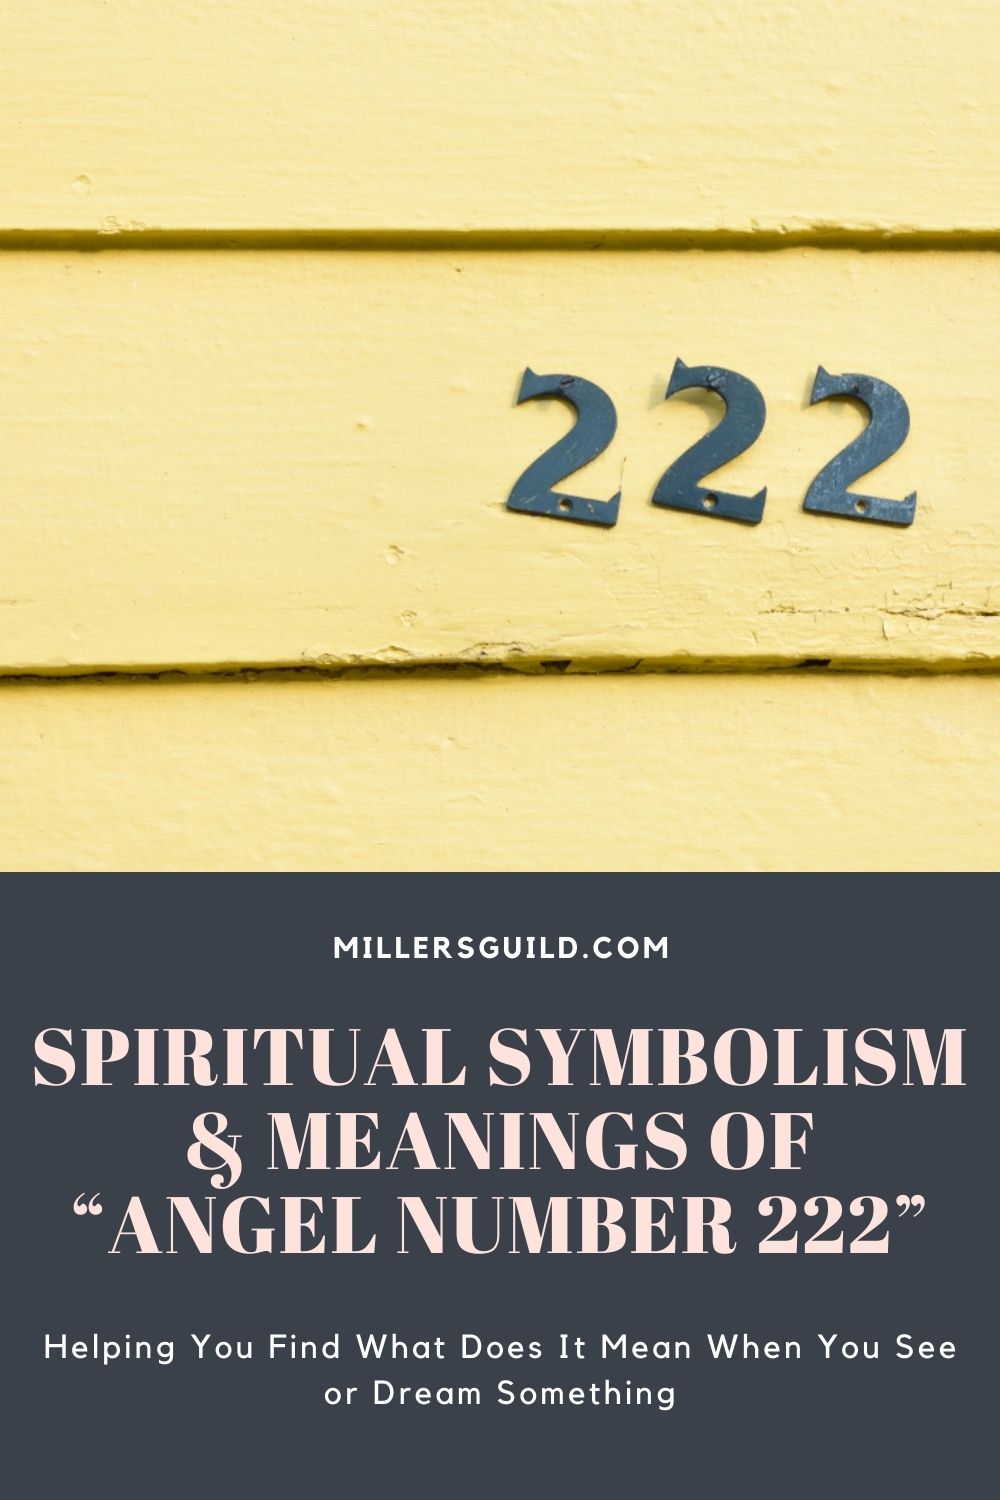 Spiritual Symbolism & Meanings of “Angel Number 222”（1）